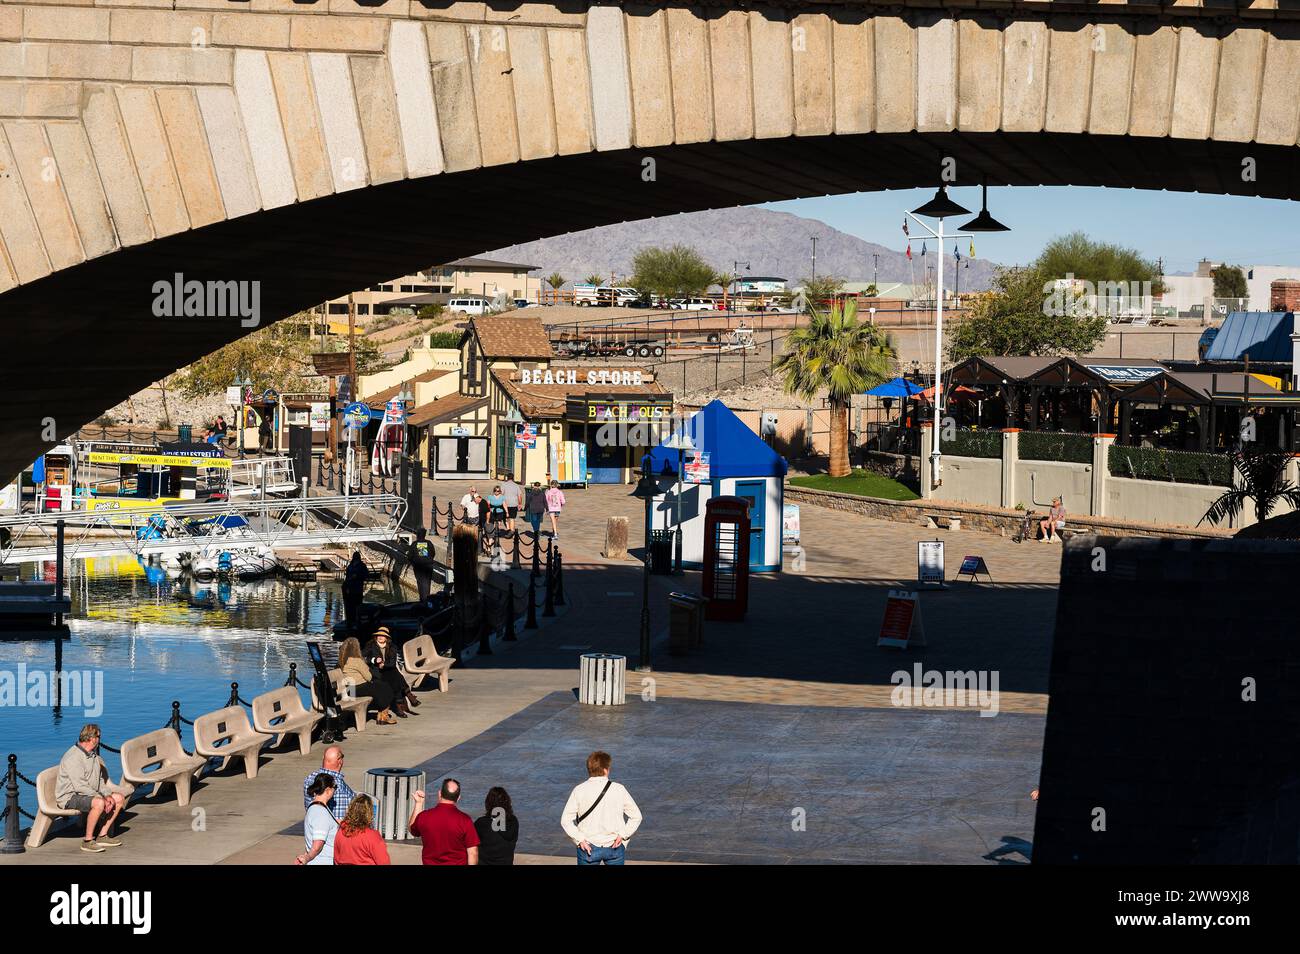 Tourists near the old London Bridge, which was relocated from London England in the 1970’s to Lake Havasu Arizona. Stock Photo